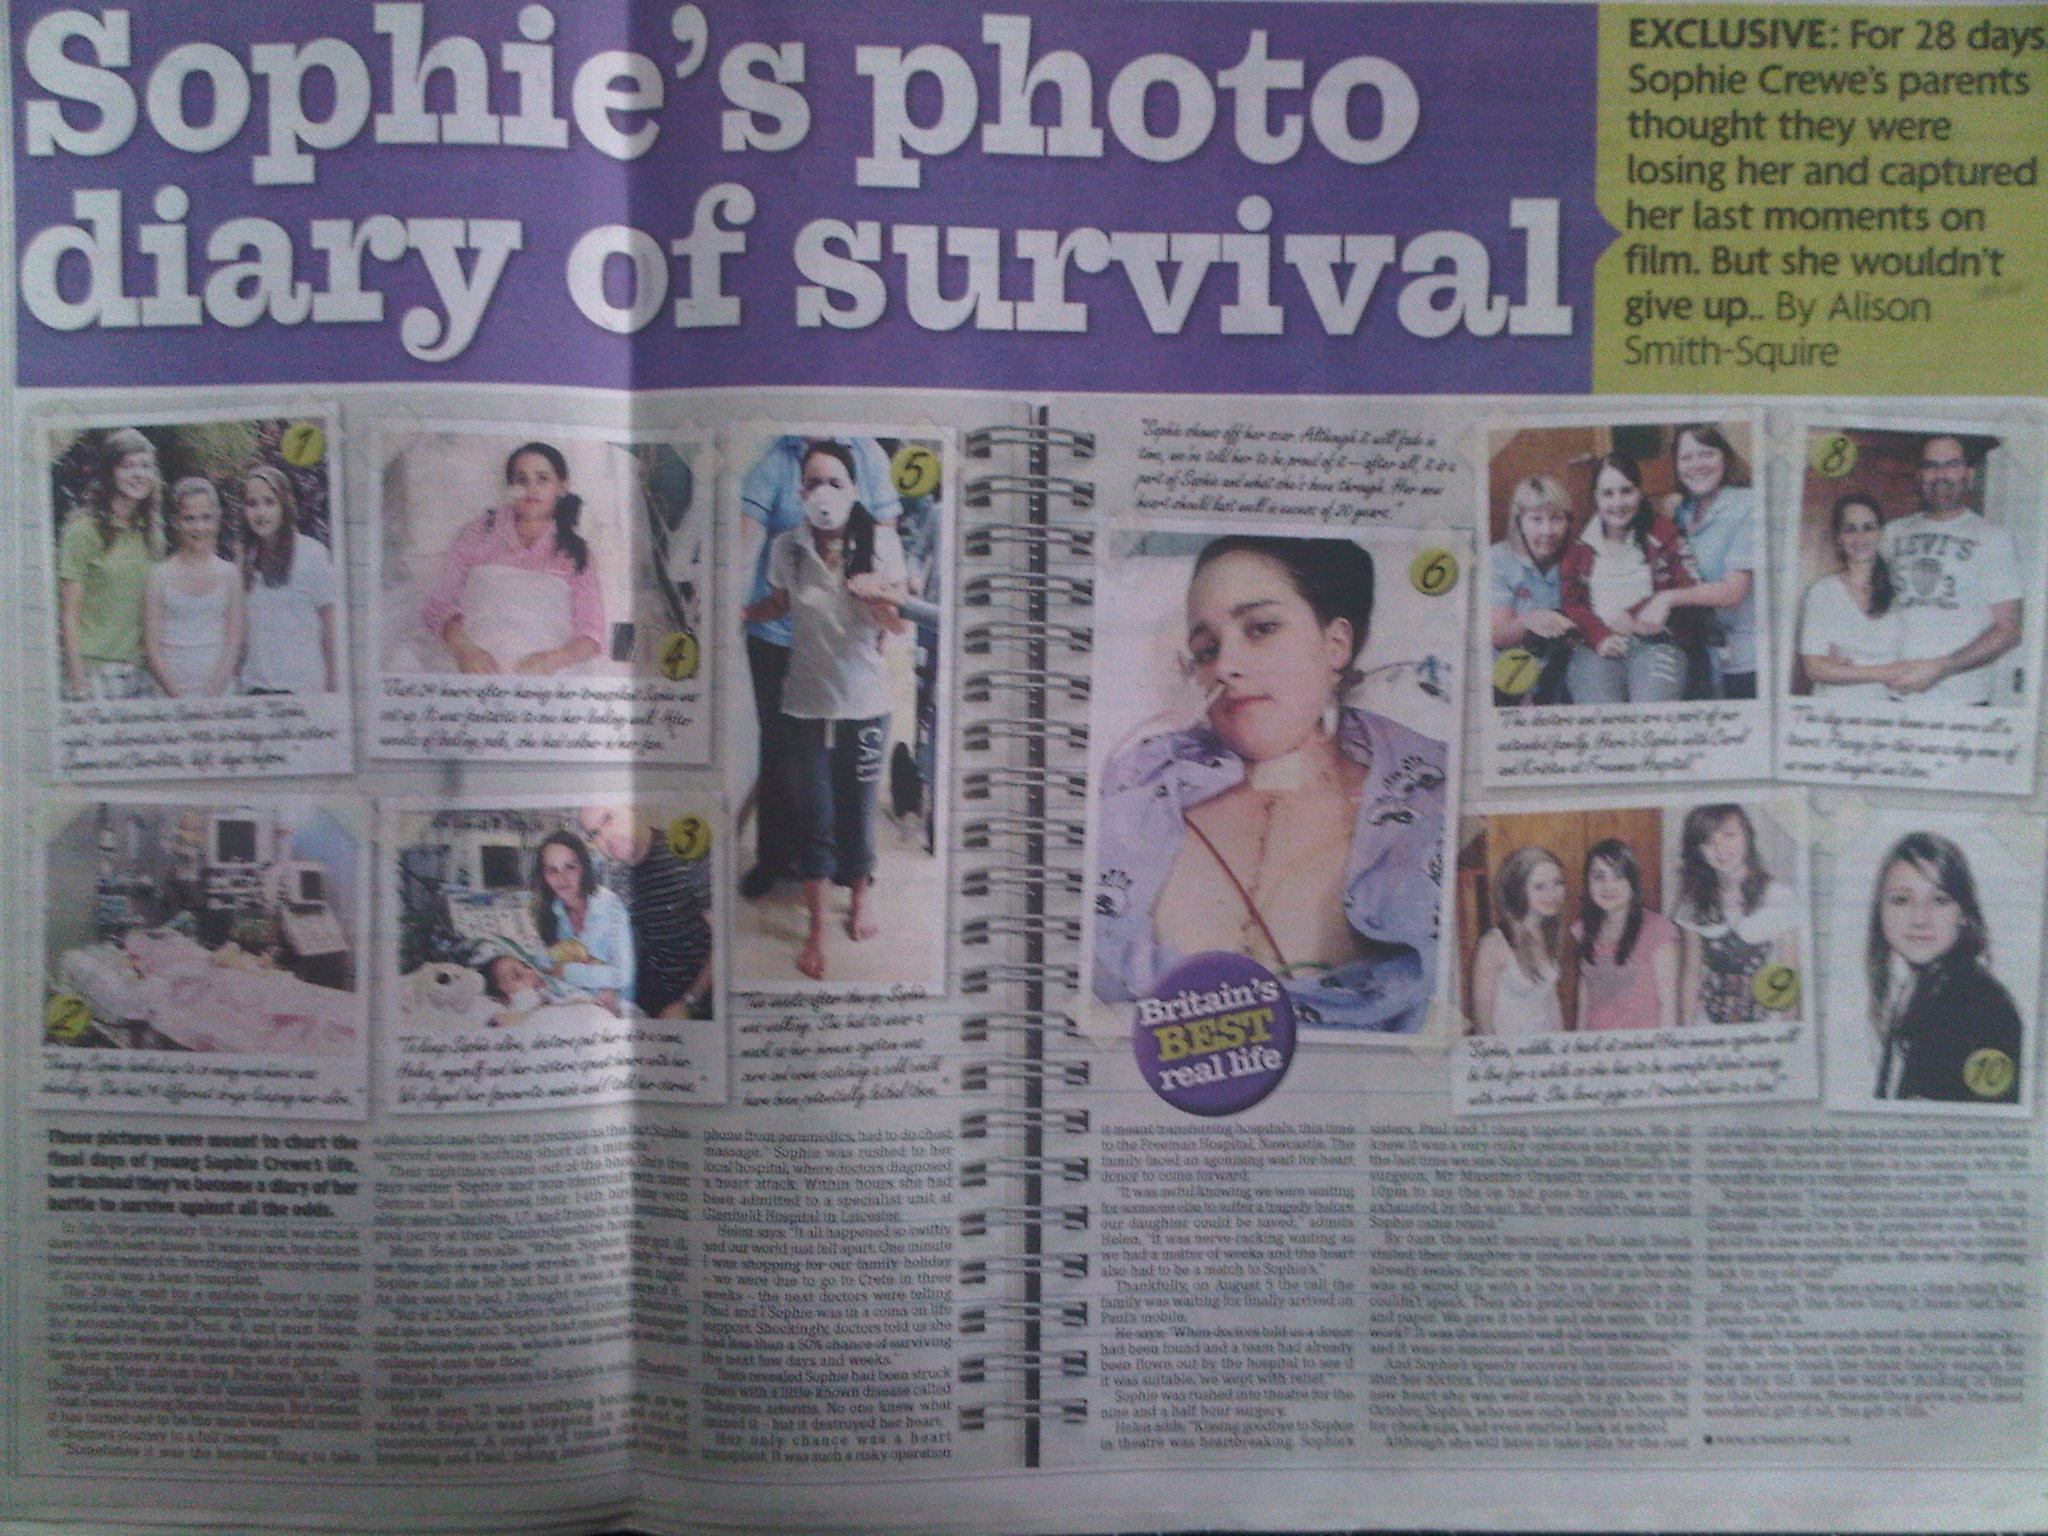 For 28 days Sophie's parents thought she would die - photo diary of her survival..